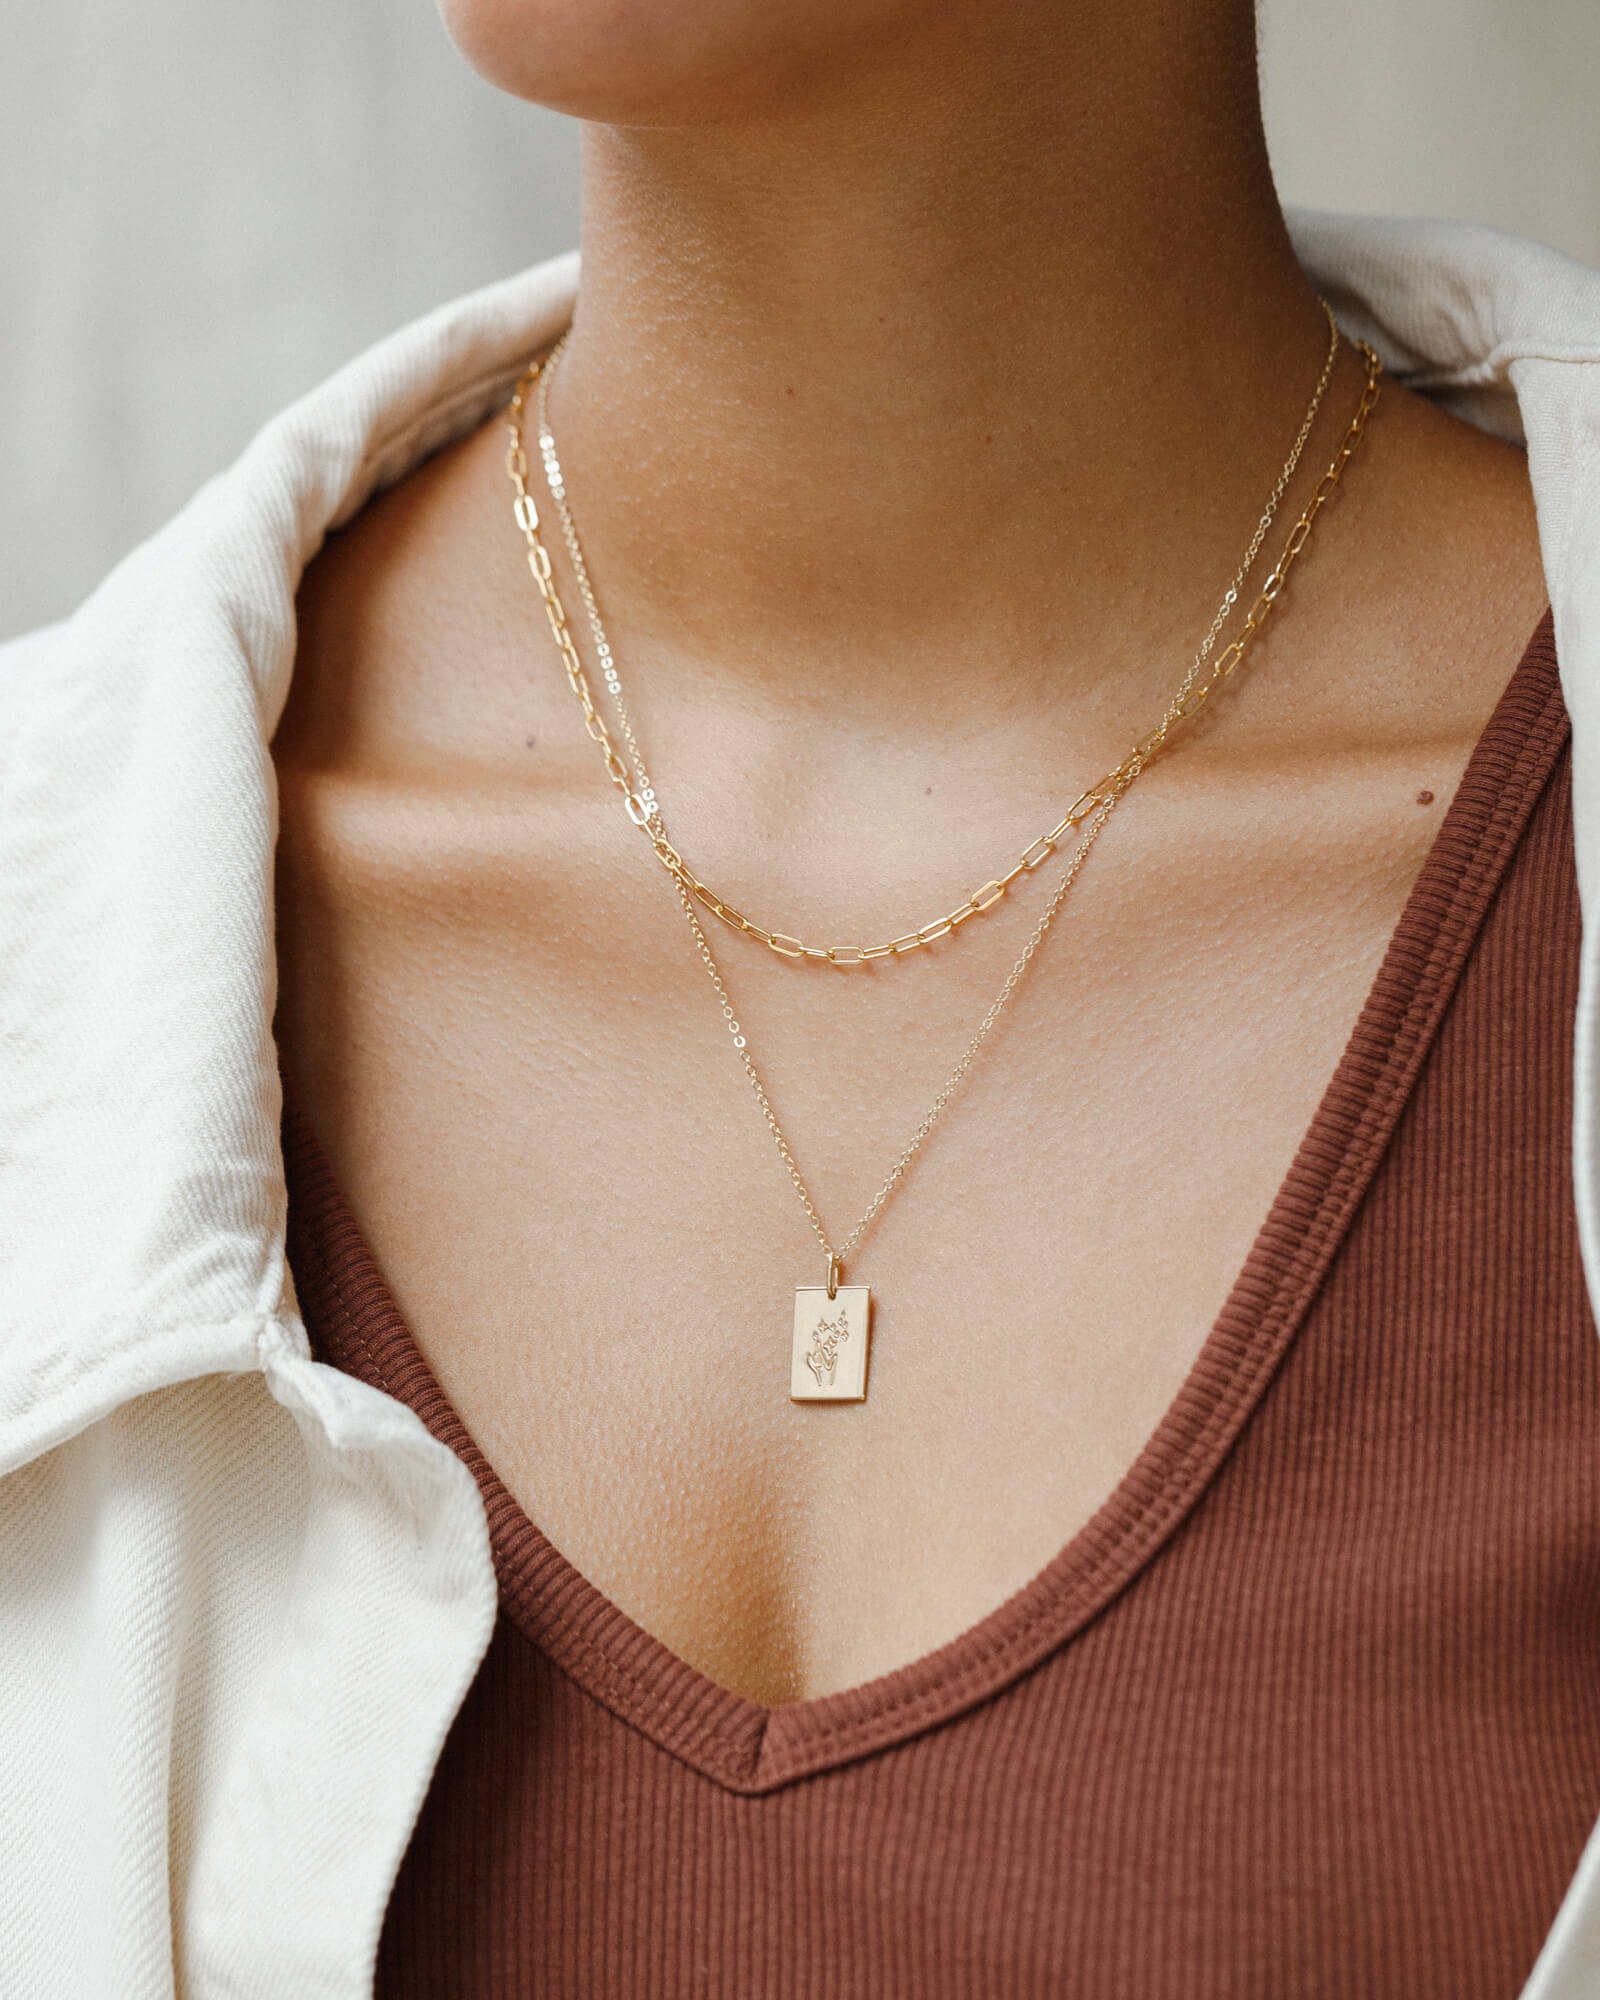 Personalized 925 Sterling Silver Paper Clip Tassel Necklace Perfect  Valentines Day Or Birthday Gift For Women Fine Gold Layered Necklace By  Aide Q0531 From Yanqin08, $11.92 | DHgate.Com